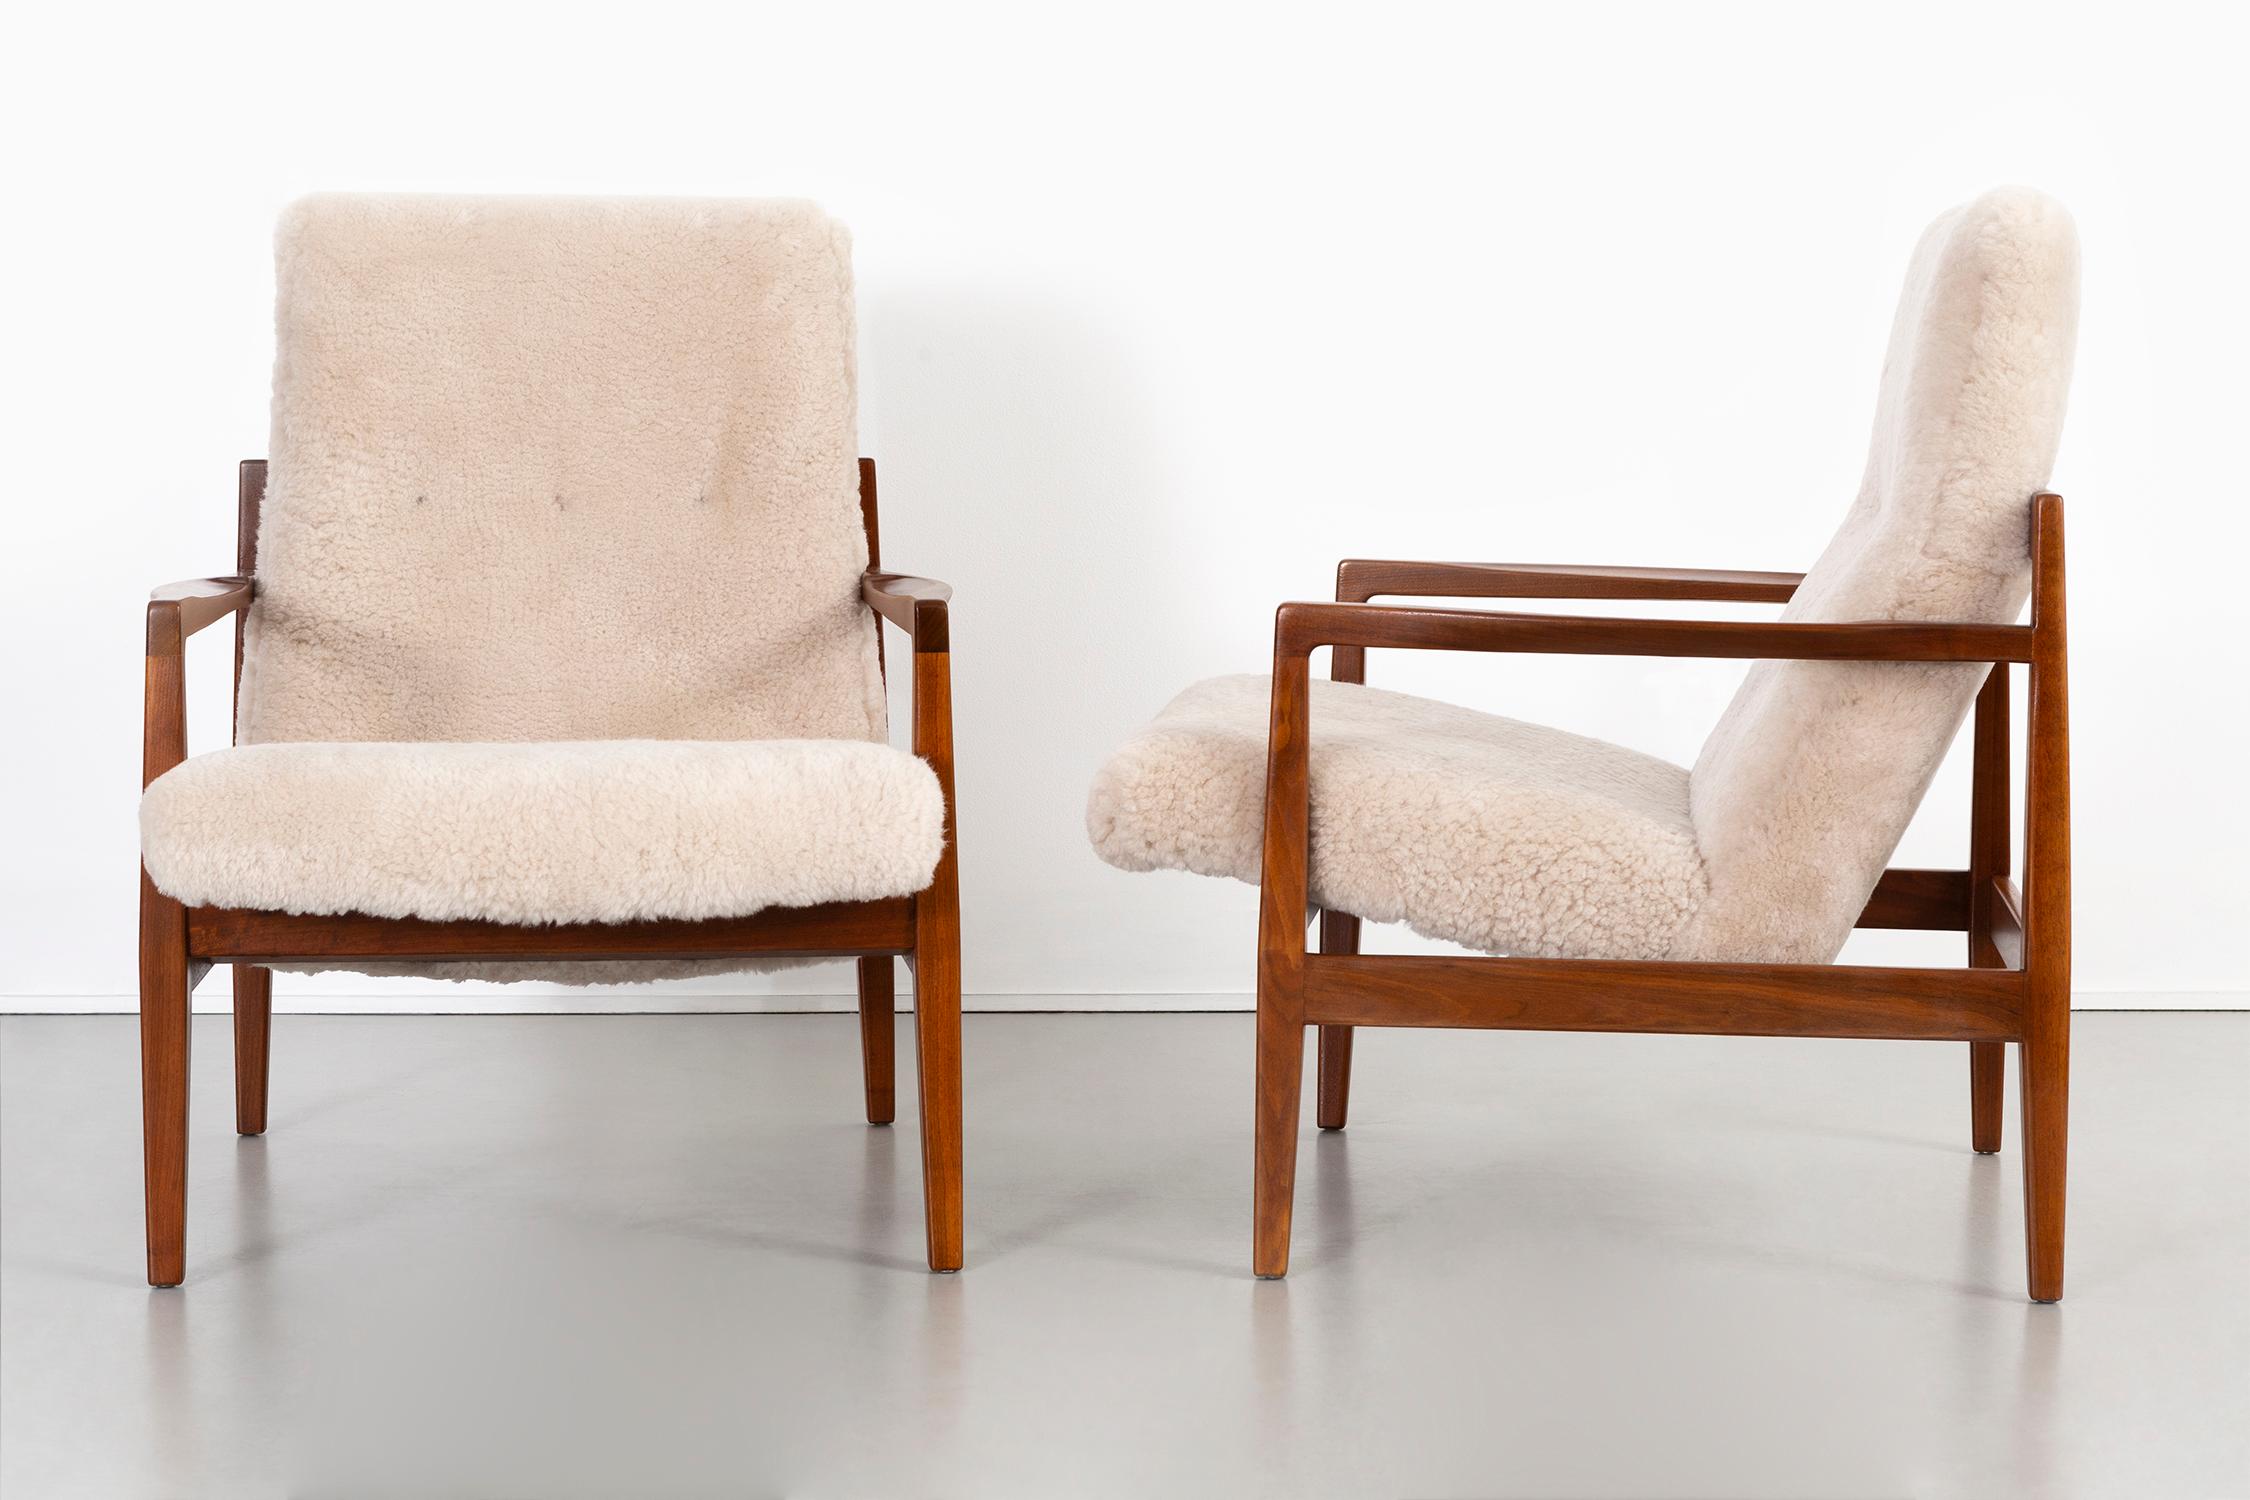 American Set of Jens Risom Mid-Century Modern Shearling Lounge Chairs